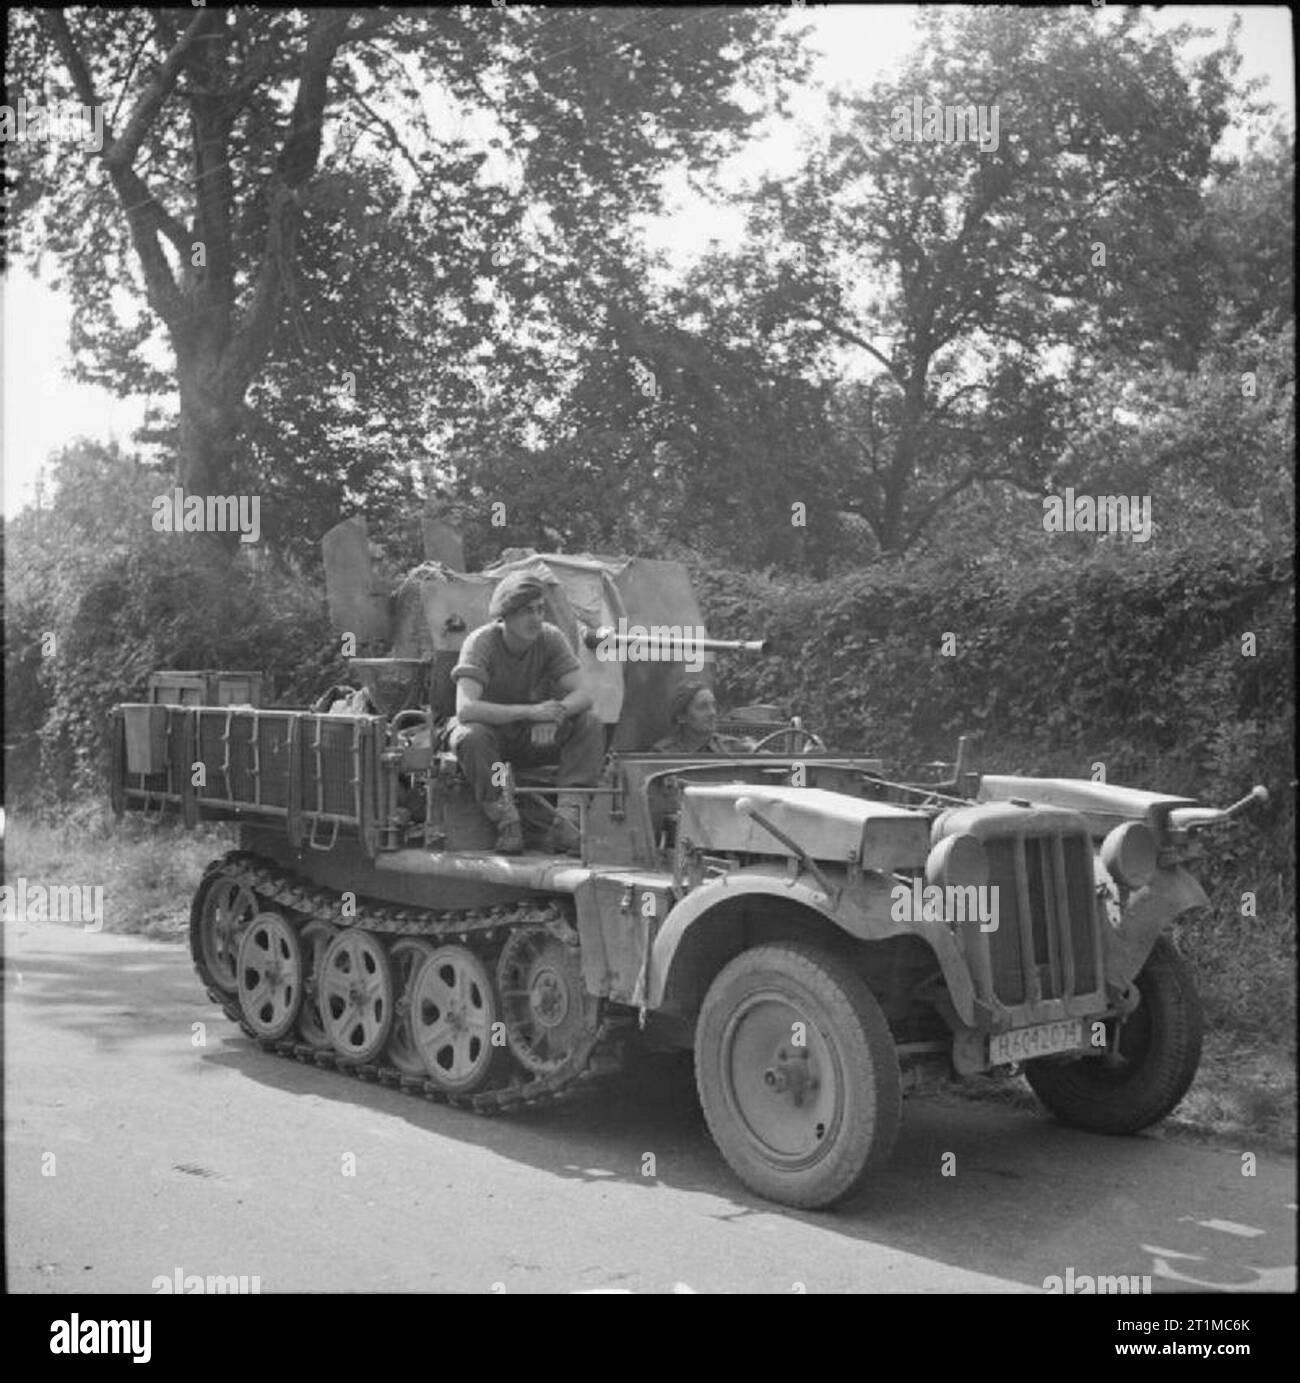 The British Army in the Normandy Campaign 1944 6th Airborne soldiers aboard a captured German half-track mounting a 20mm gun, which they used to shoot down a German aircraft, 28 August 1944. Stock Photo